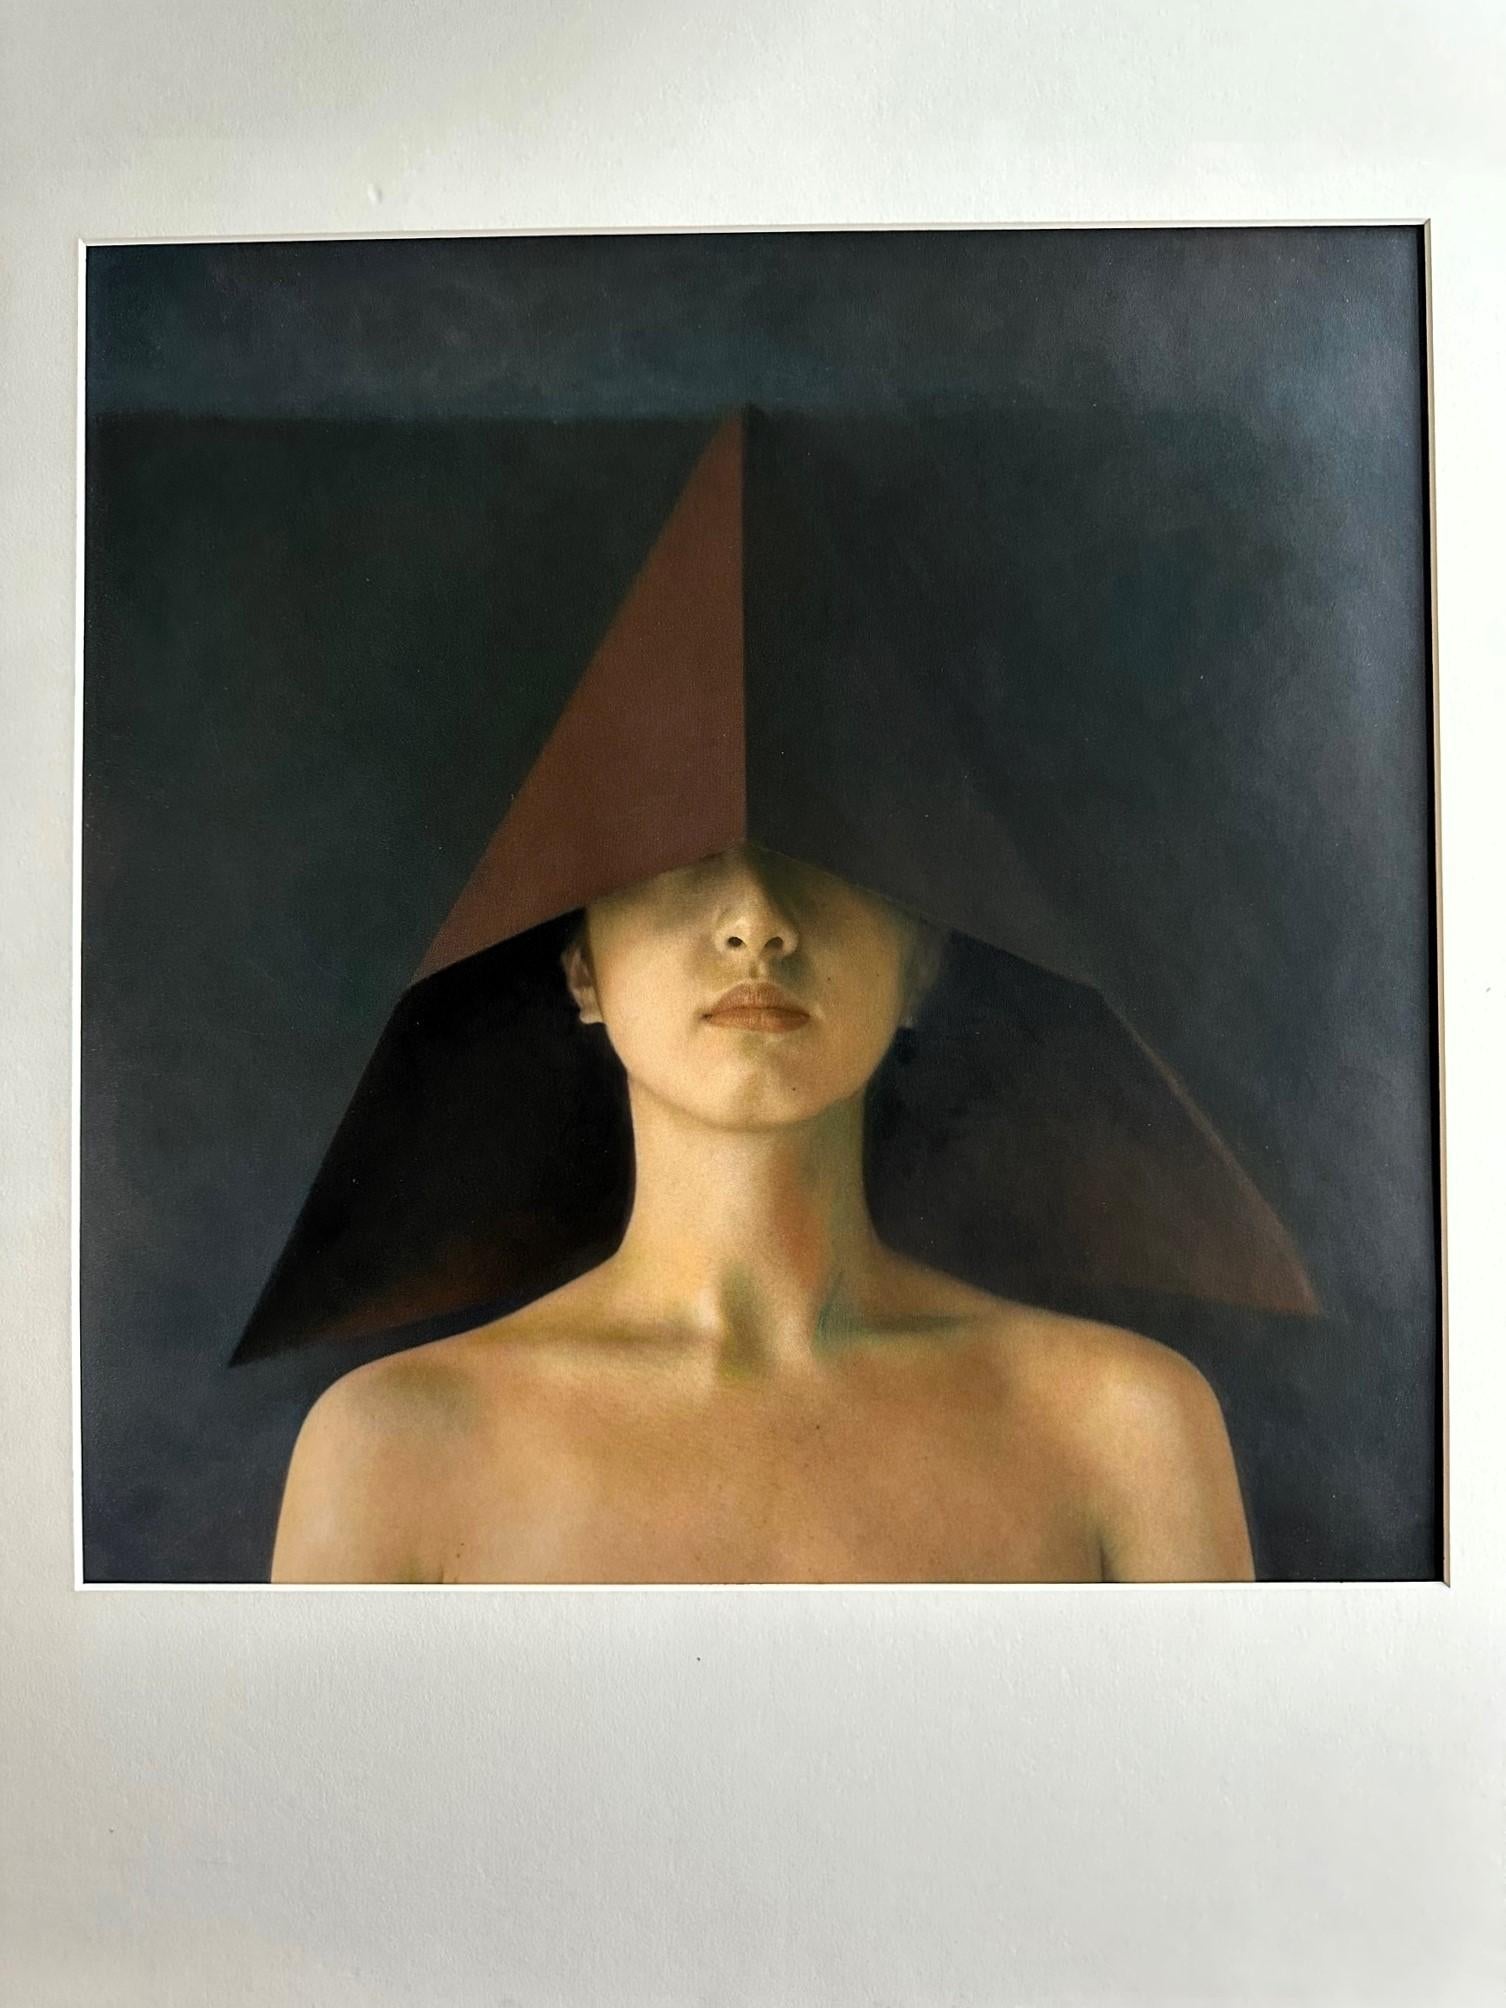 Artist: Susan Fenton (1949-2018; American)
Title: Figure with Folded Paper Hat. Japan series
Year of Creation: 1993
Edition: 1/10
Medium: Toned Gelatin Silver Print; hand painted with Oils
Image size: 16